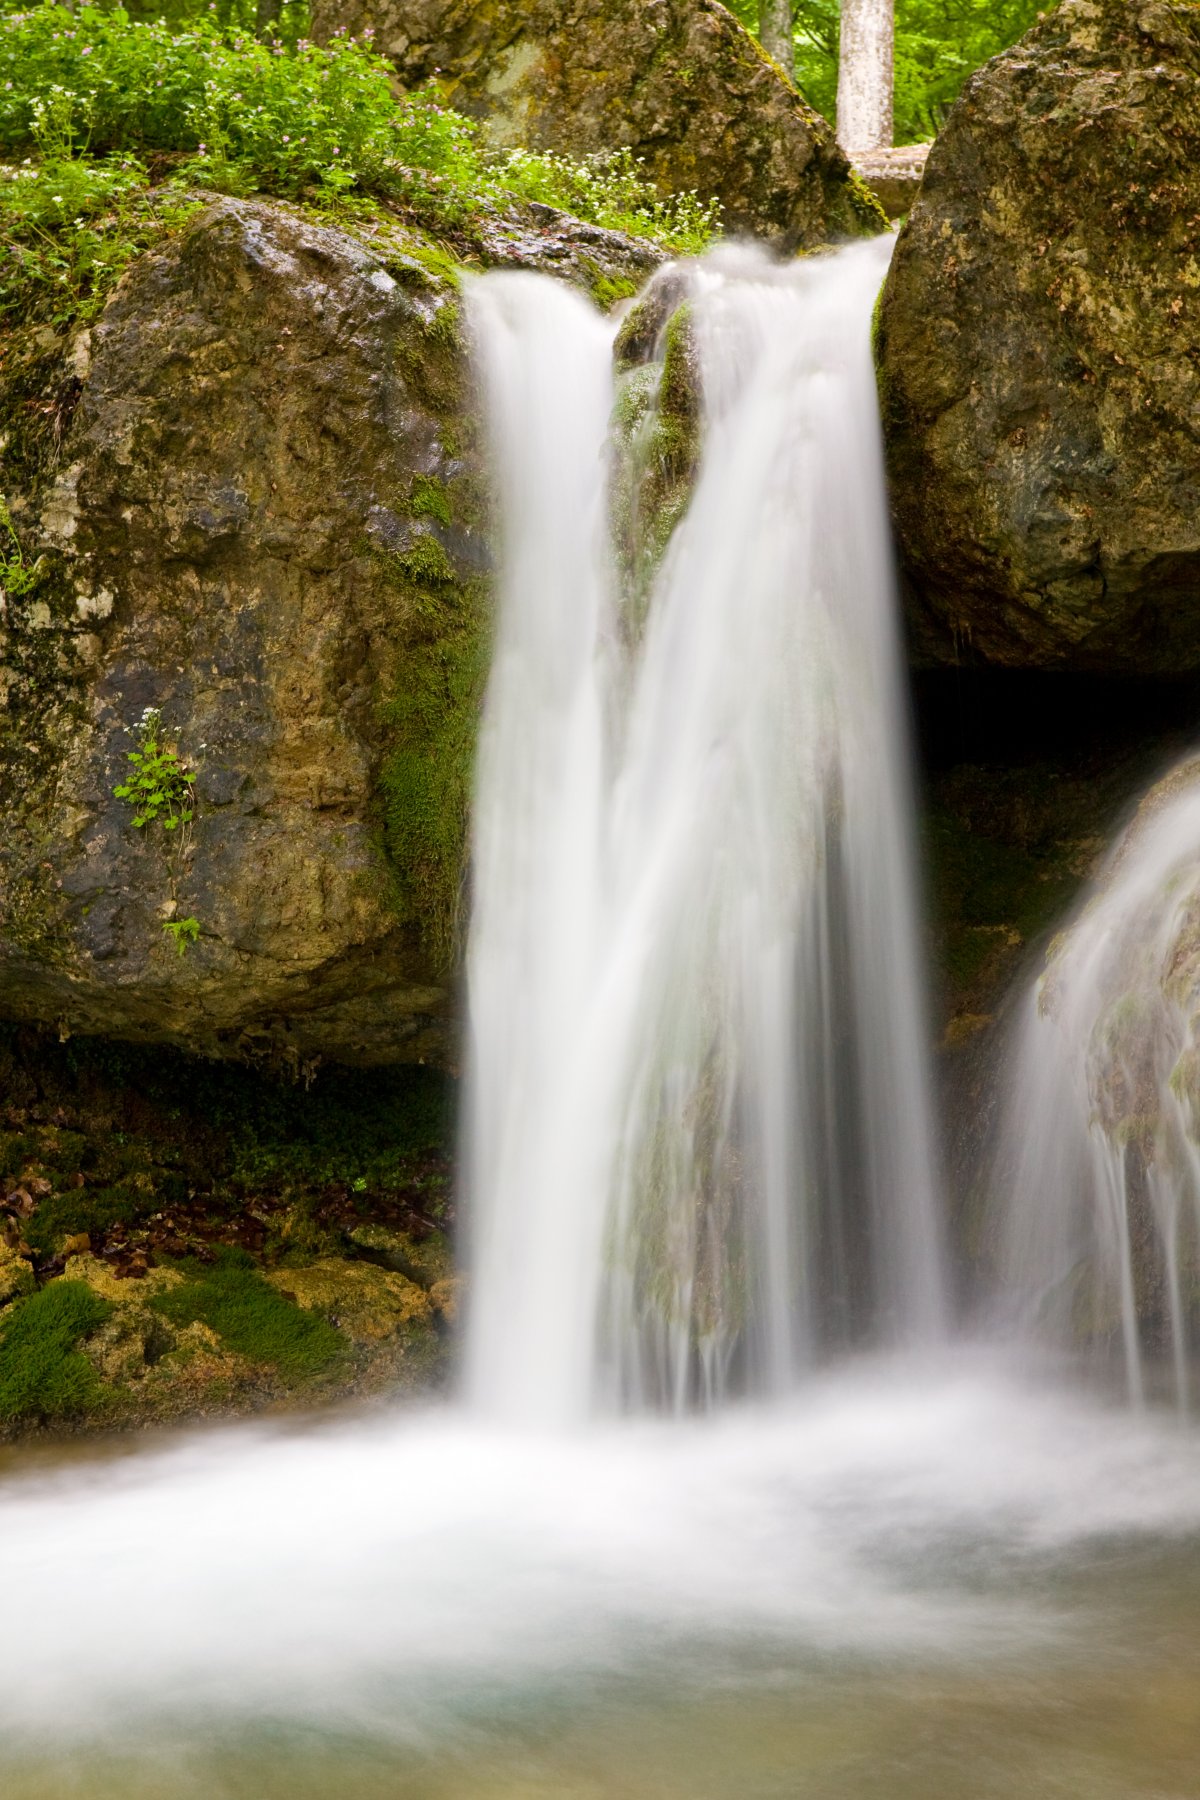 Pictures of landscapes and waterfalls